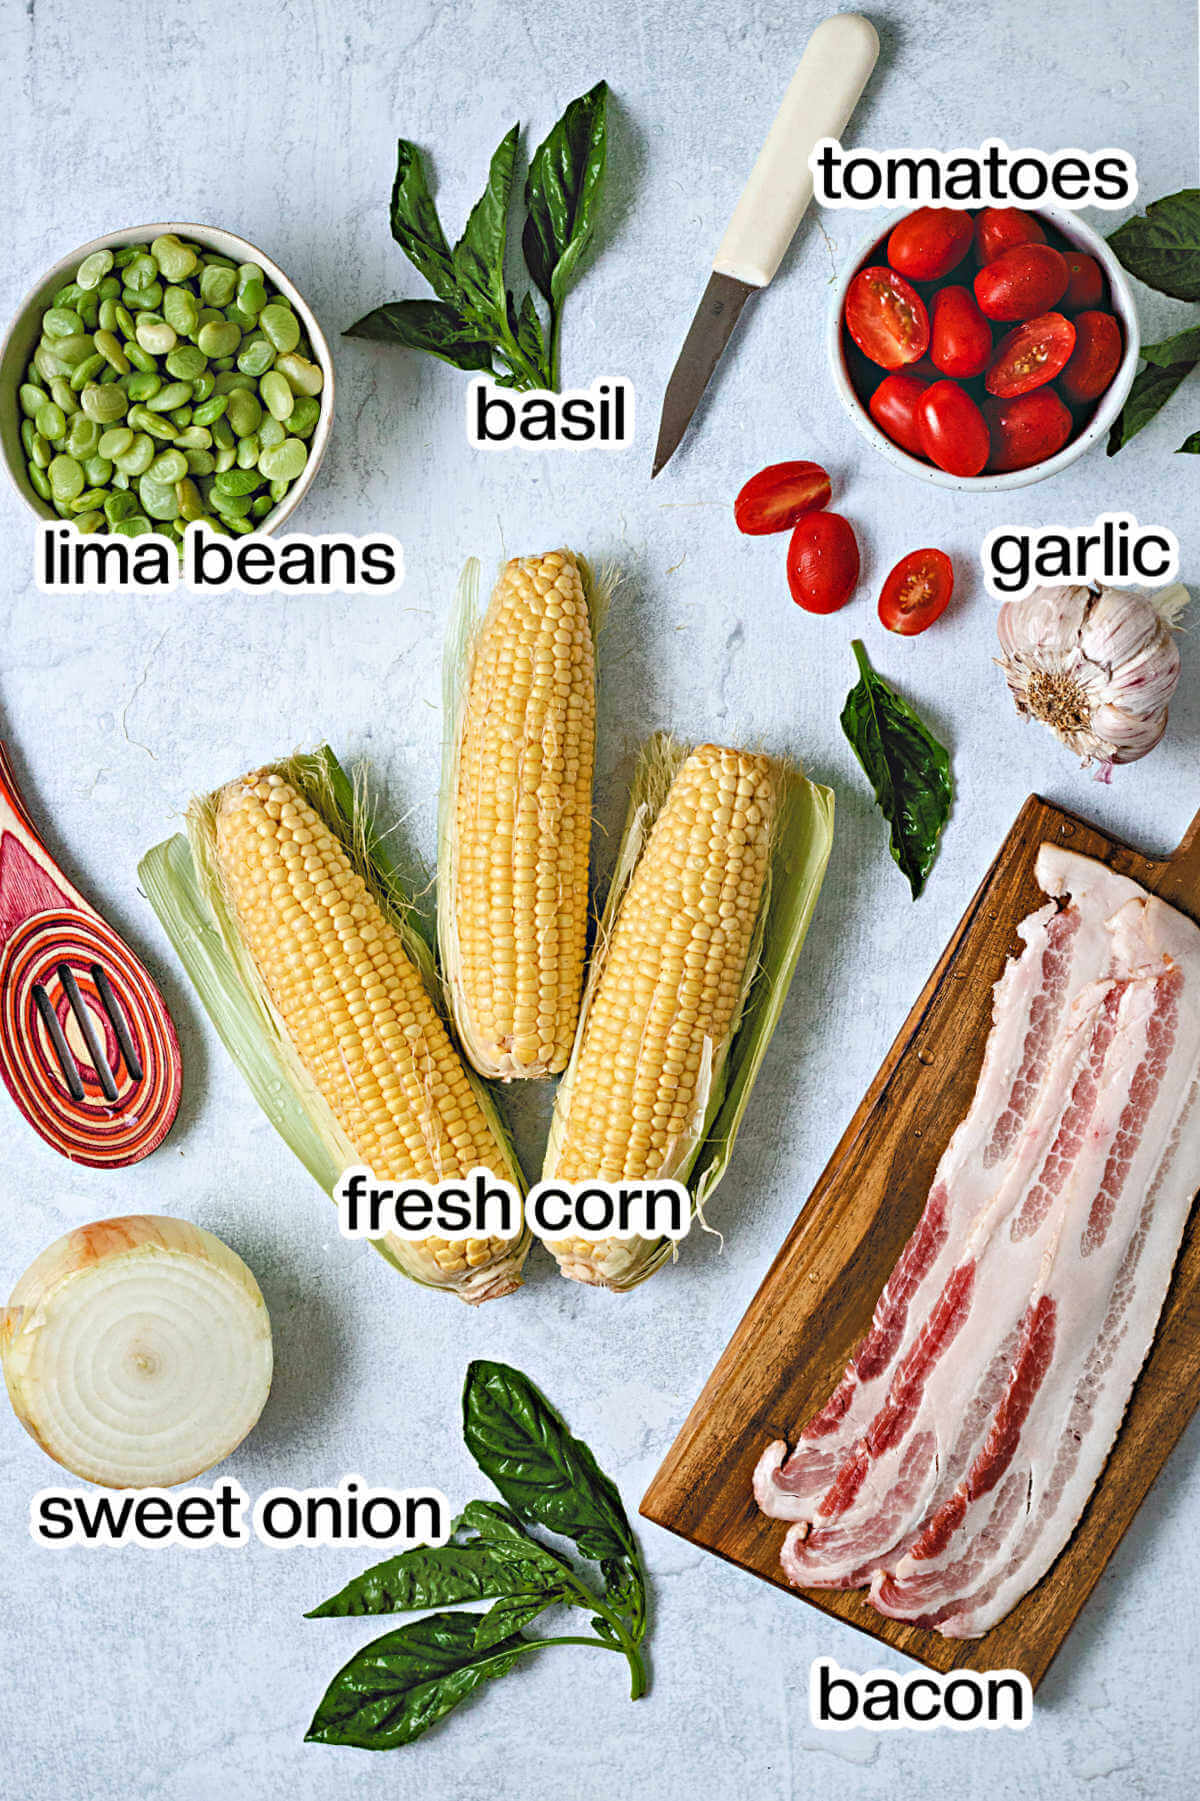 Ingredients for corn succotash on a table: 3 ears of corn, fresh basil, a bowl of lima beans, grape tomatoes, onion, garlic, and bacon slices.